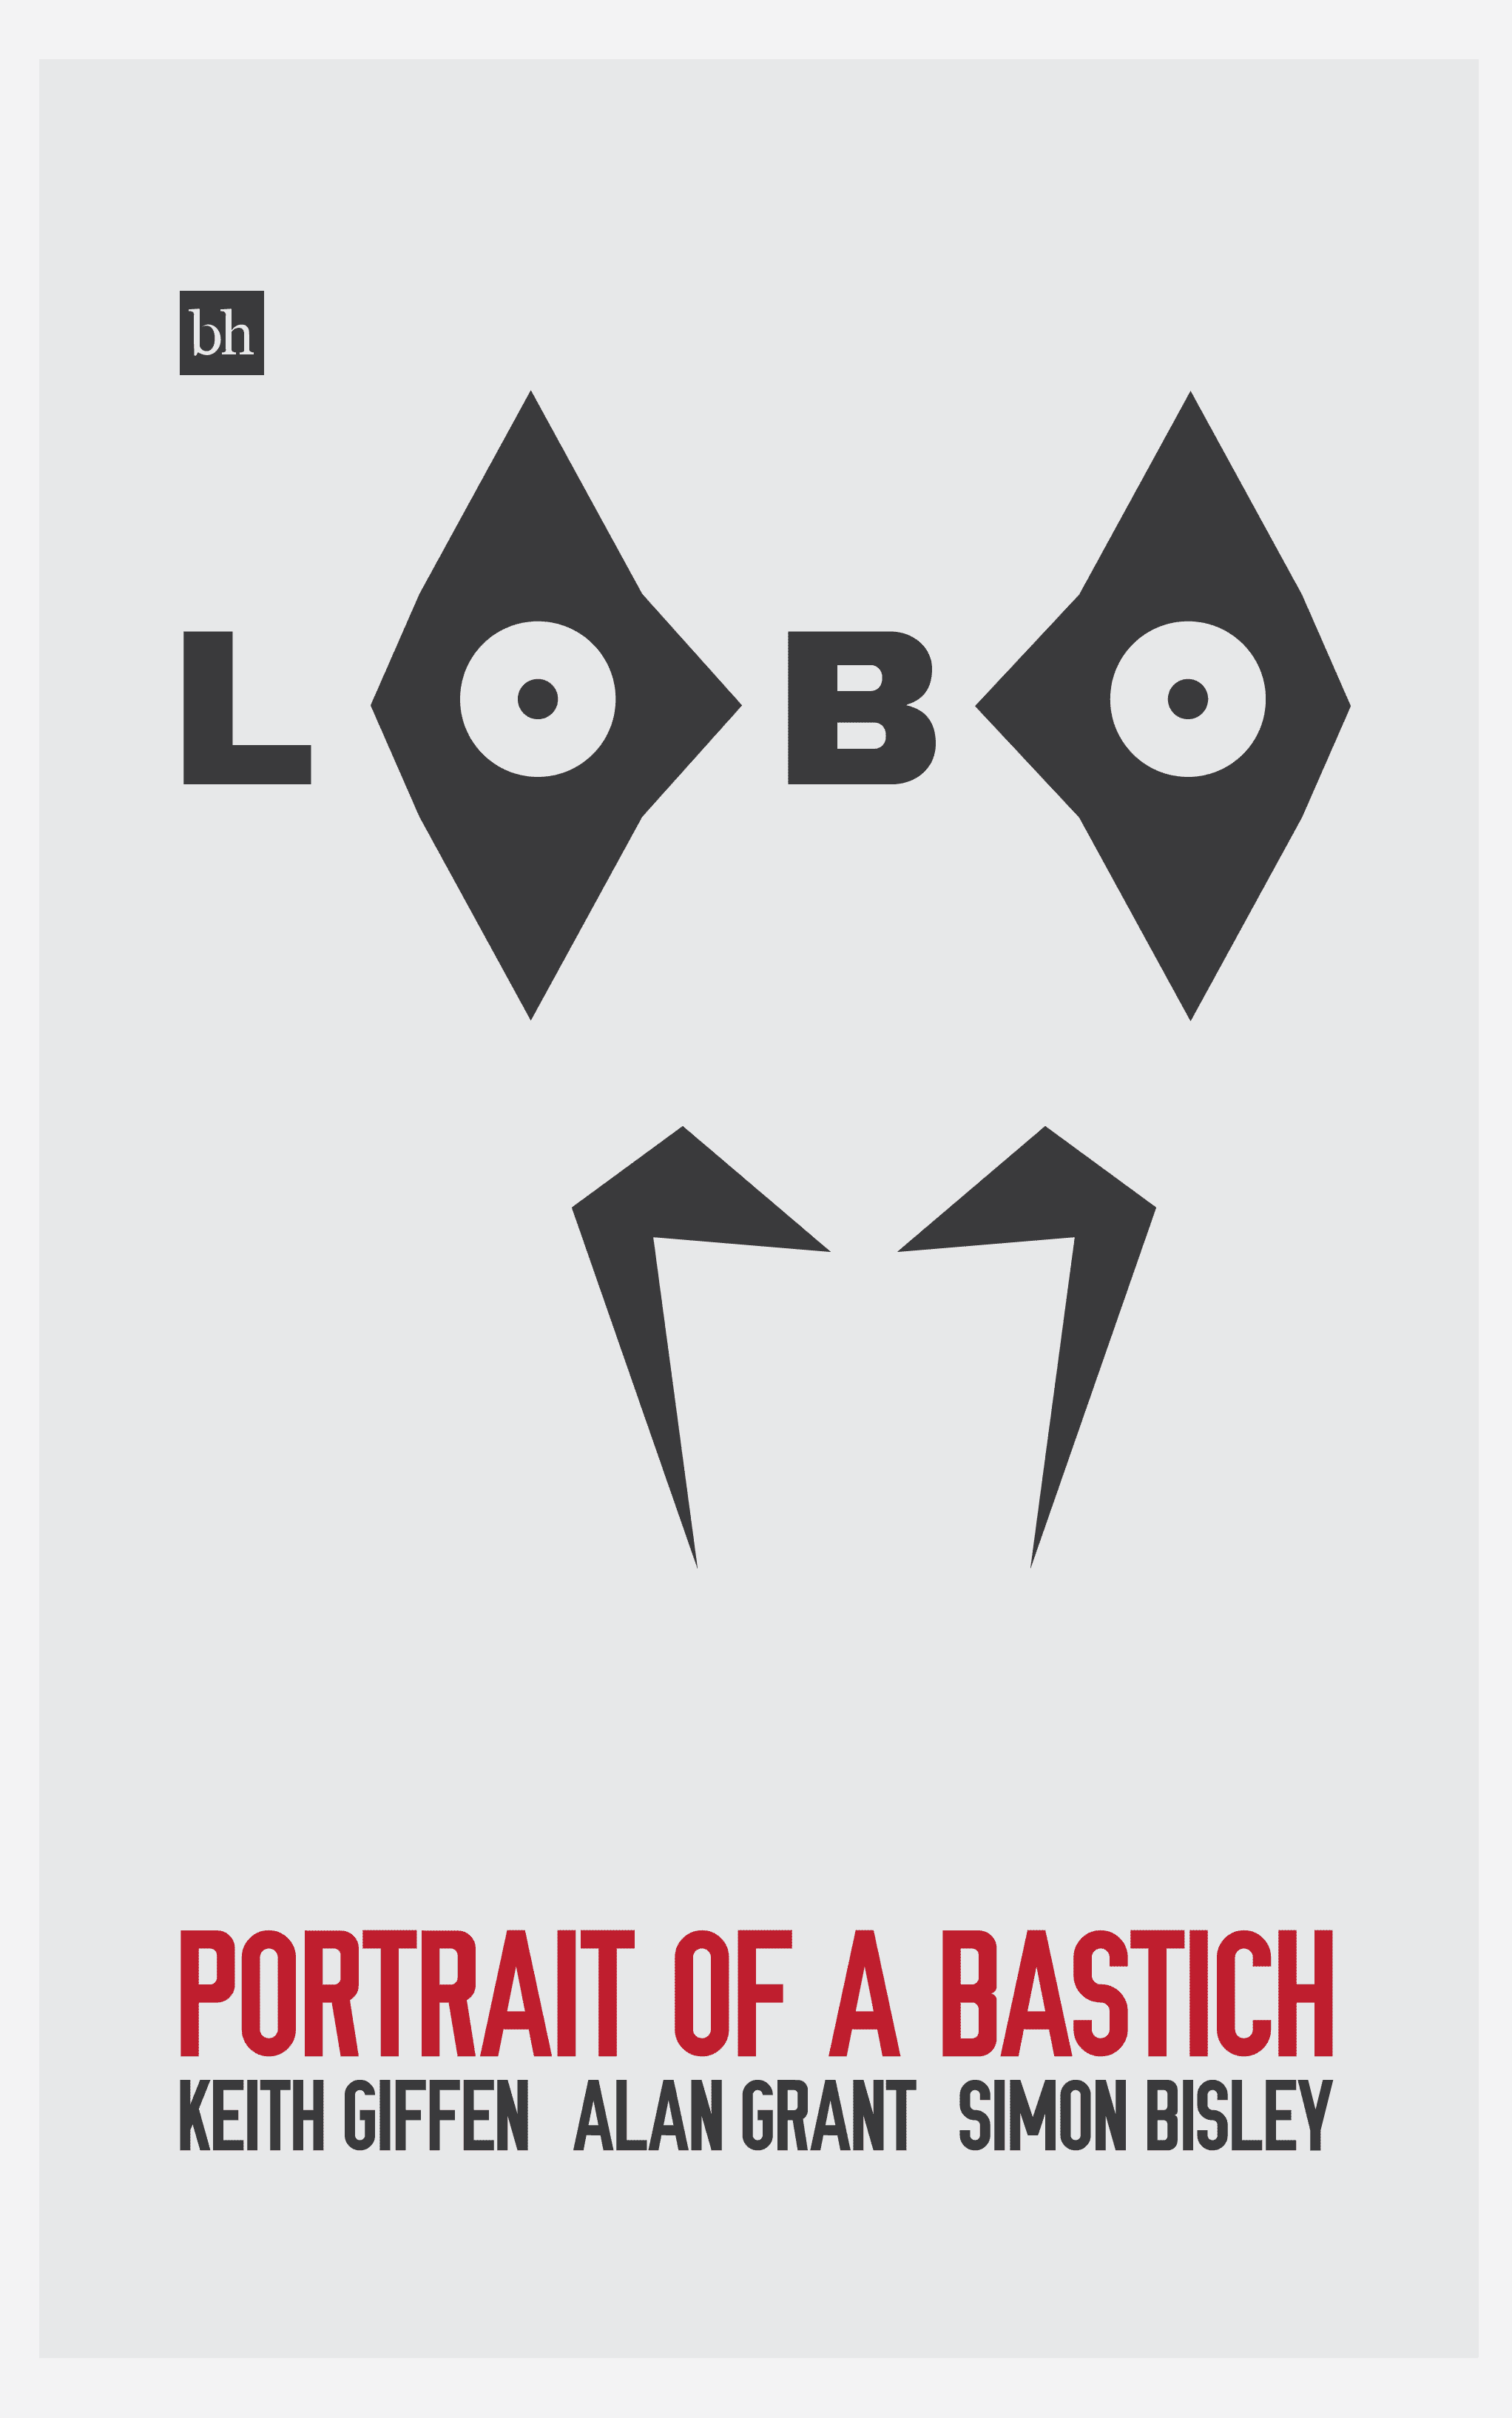 Lobo: Portrait of a Bastich by Keith Giffen and Alan Grant